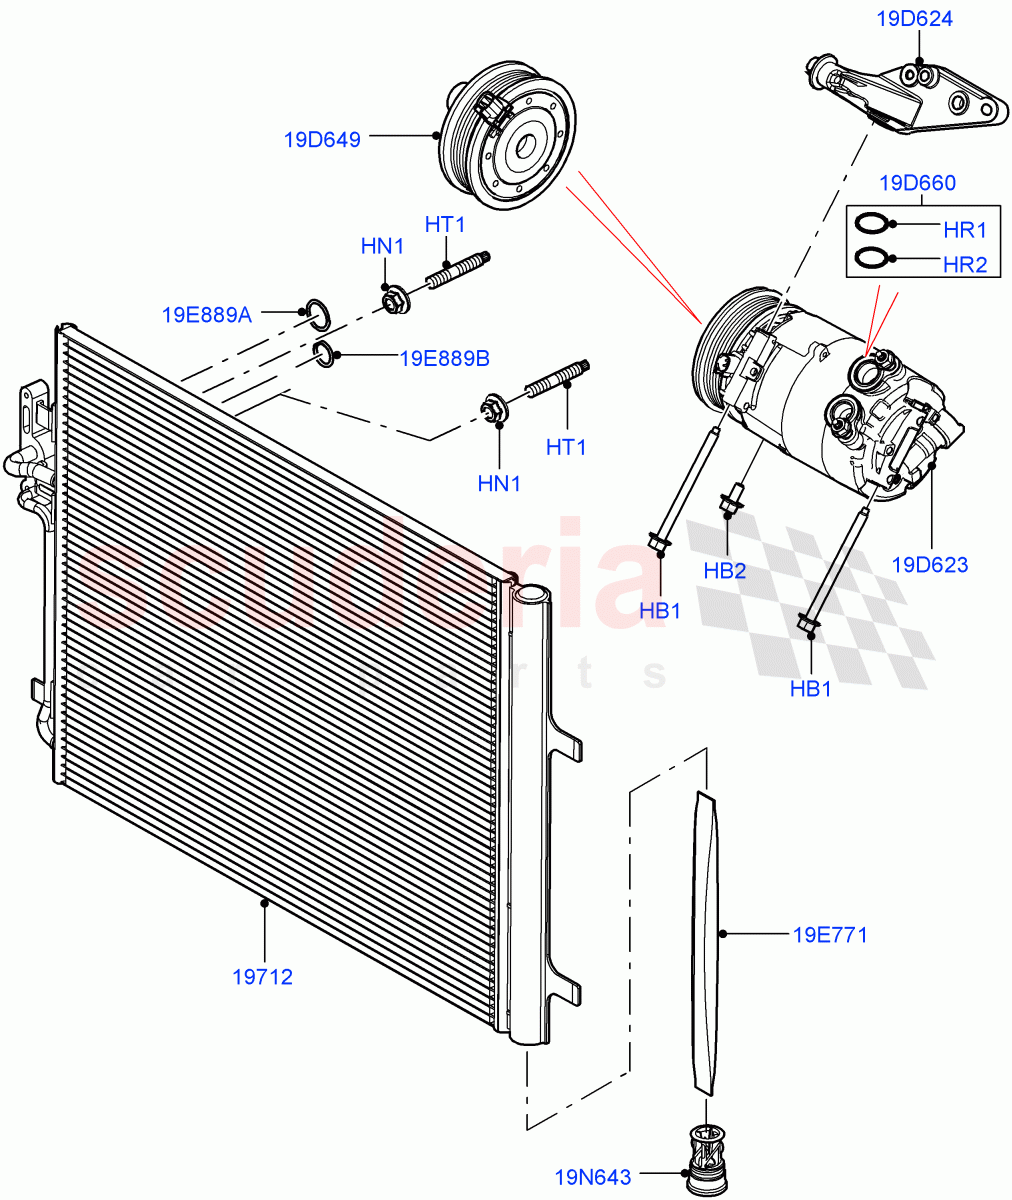 Air Conditioning Condensr/Compressr(2.0L 16V TIVCT T/C 240PS Petrol,Itatiaia (Brazil))((V)FROMGT000001) of Land Rover Land Rover Range Rover Evoque (2012-2018) [2.0 Turbo Diesel]